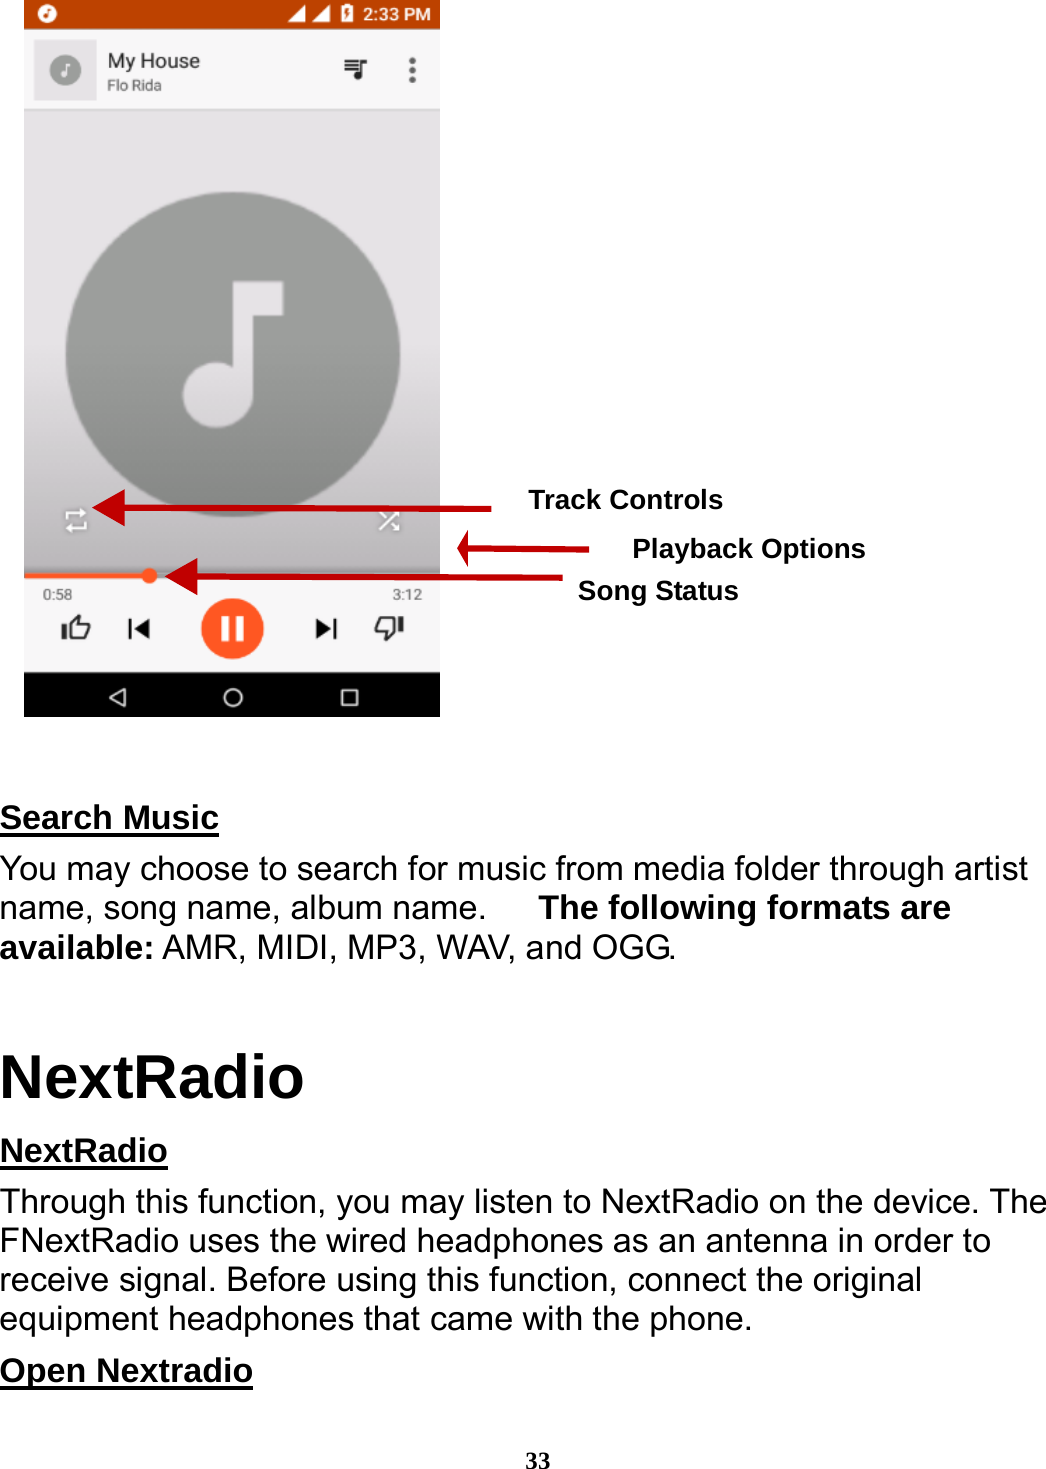  33    Search Music                                                       You may choose to search for music from media folder through artist name, song name, album name.      The following formats are available: AMR, MIDI, MP3, WAV, and OGG. NextRadio NextRadio                                                          Through this function, you may listen to NextRadio on the device. The FNextRadio uses the wired headphones as an antenna in order to receive signal. Before using this function, connect the original equipment headphones that came with the phone. Open Nextradio                                                     Song Status Track Controls Playback Options 